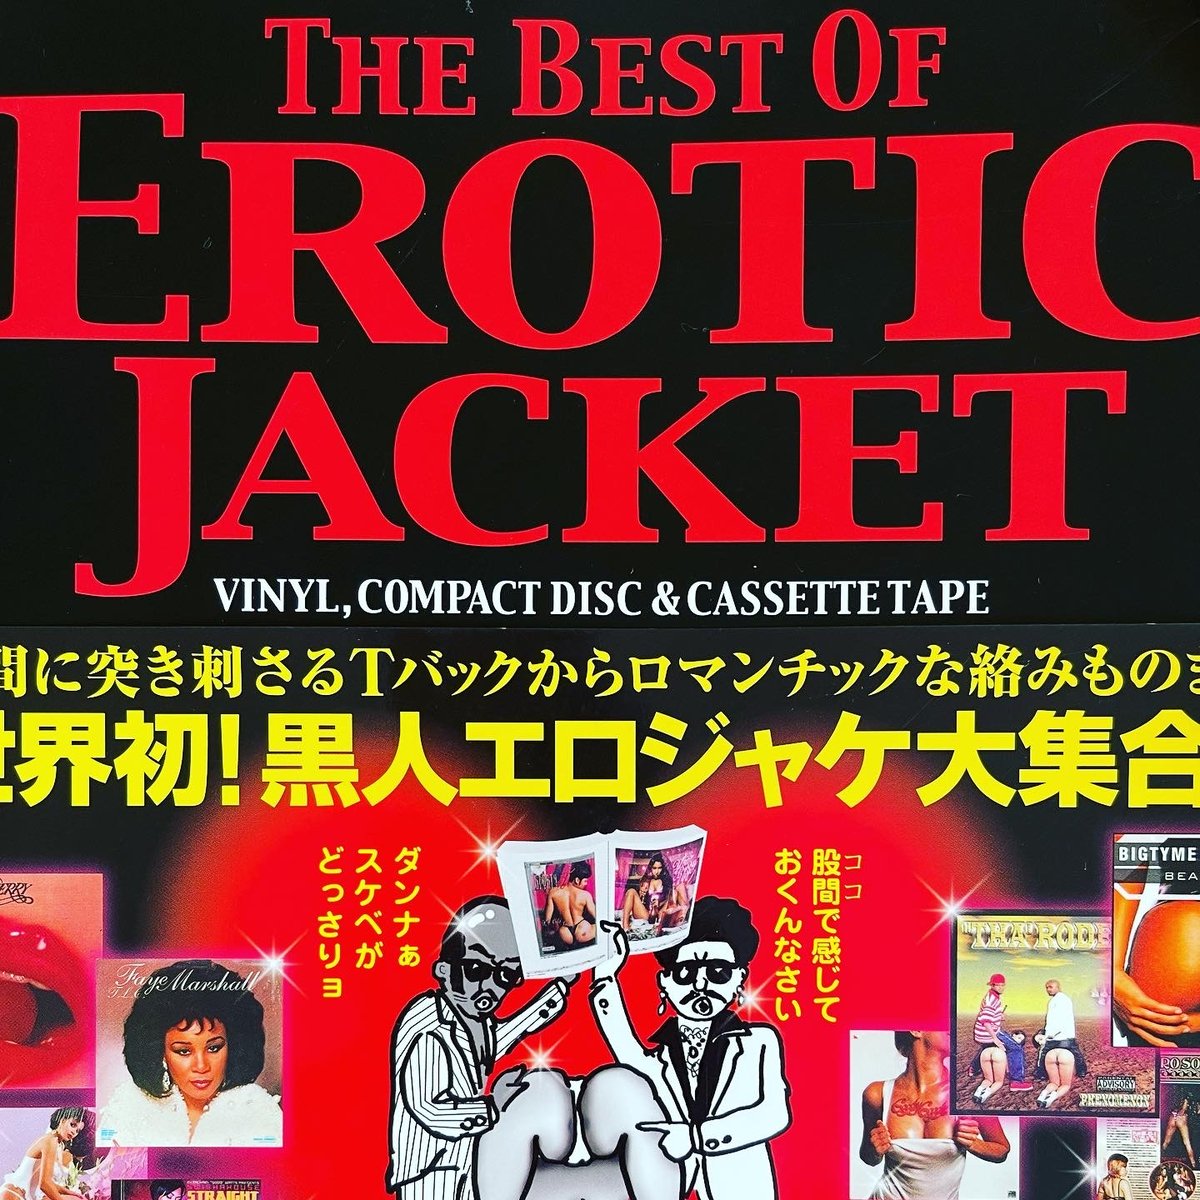 MODEST) BOOKS — (The Best of Erotic Jacket)